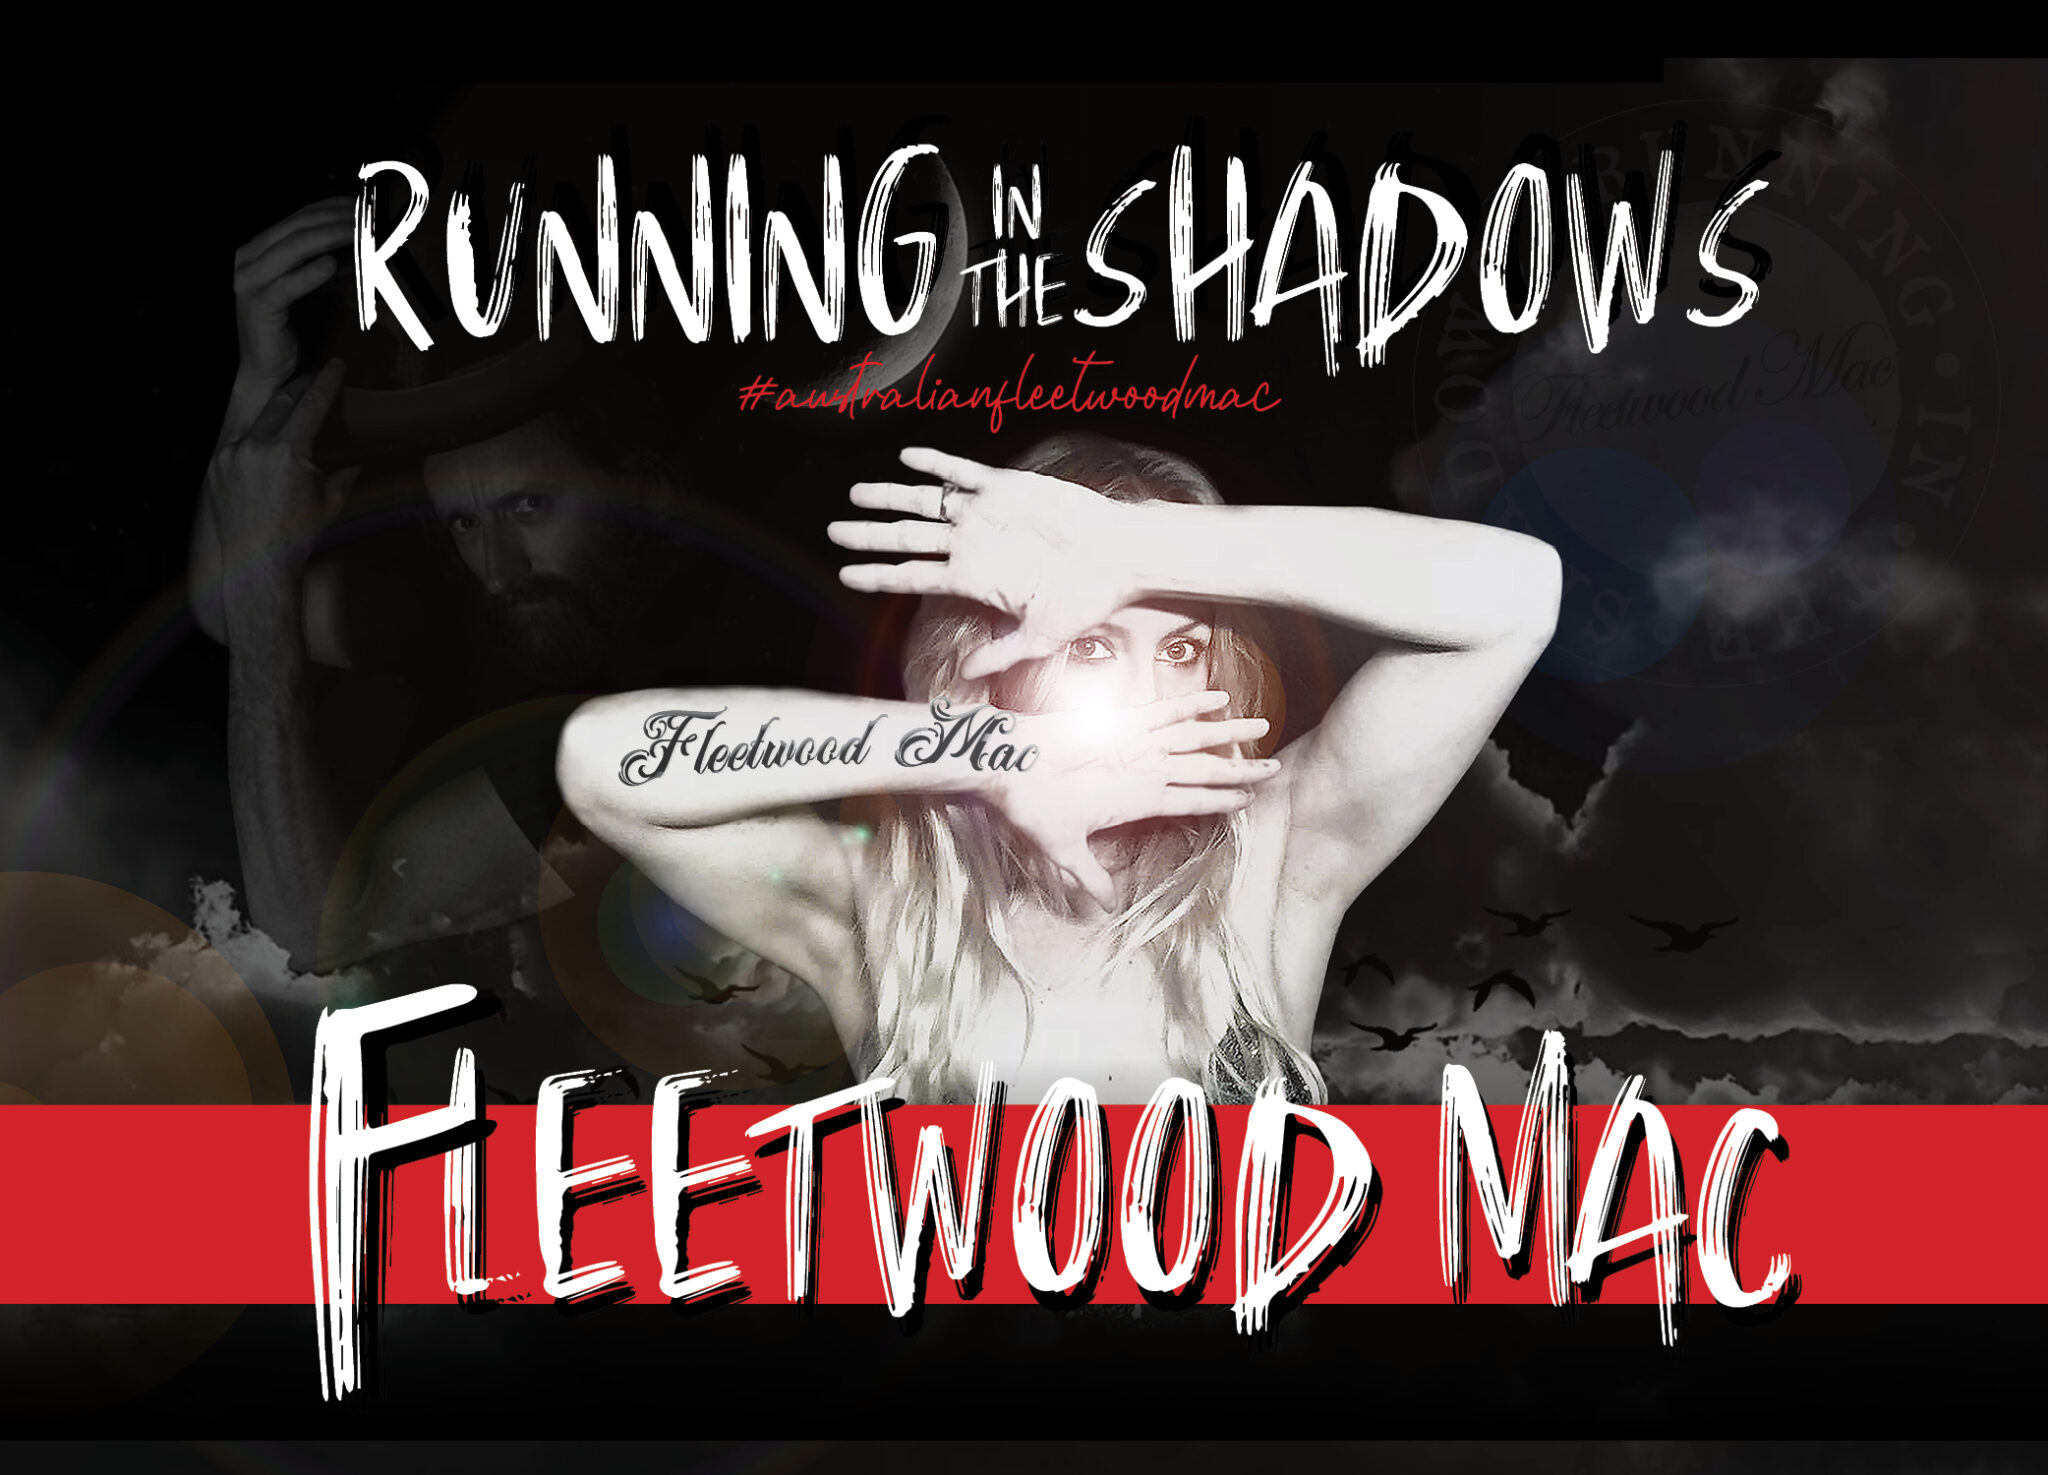 download free mp3 fleetwood mac running in the shadows